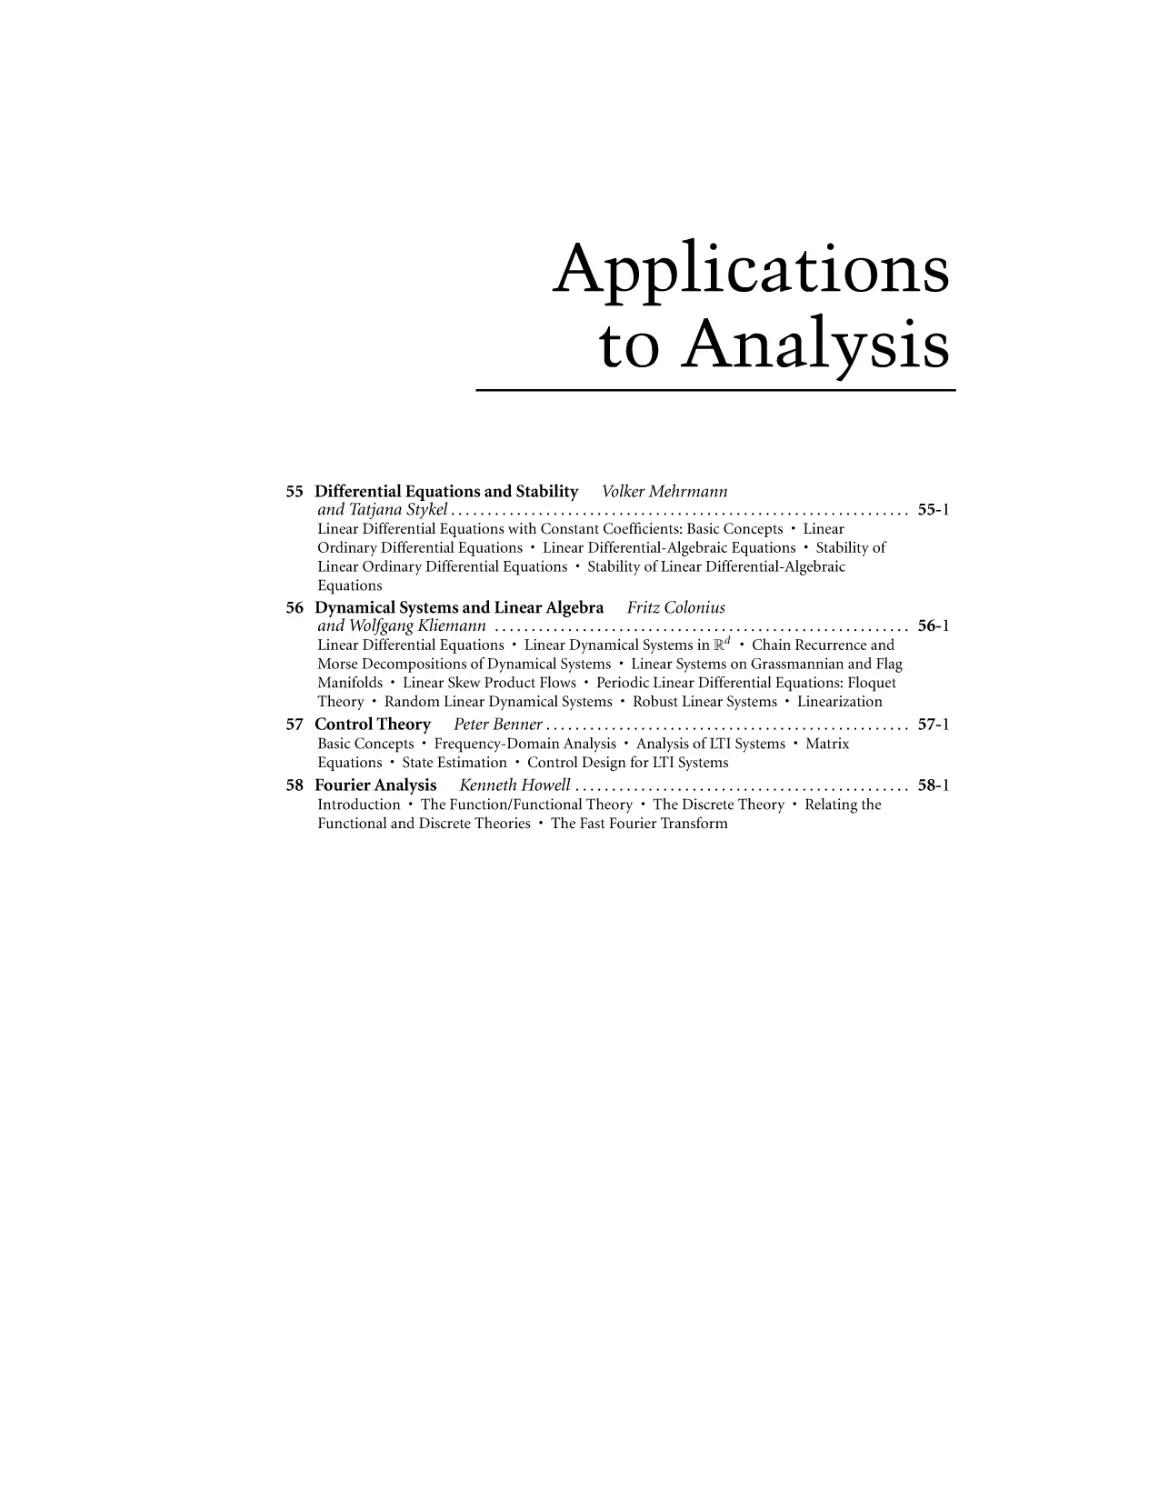 Applications to Analysis